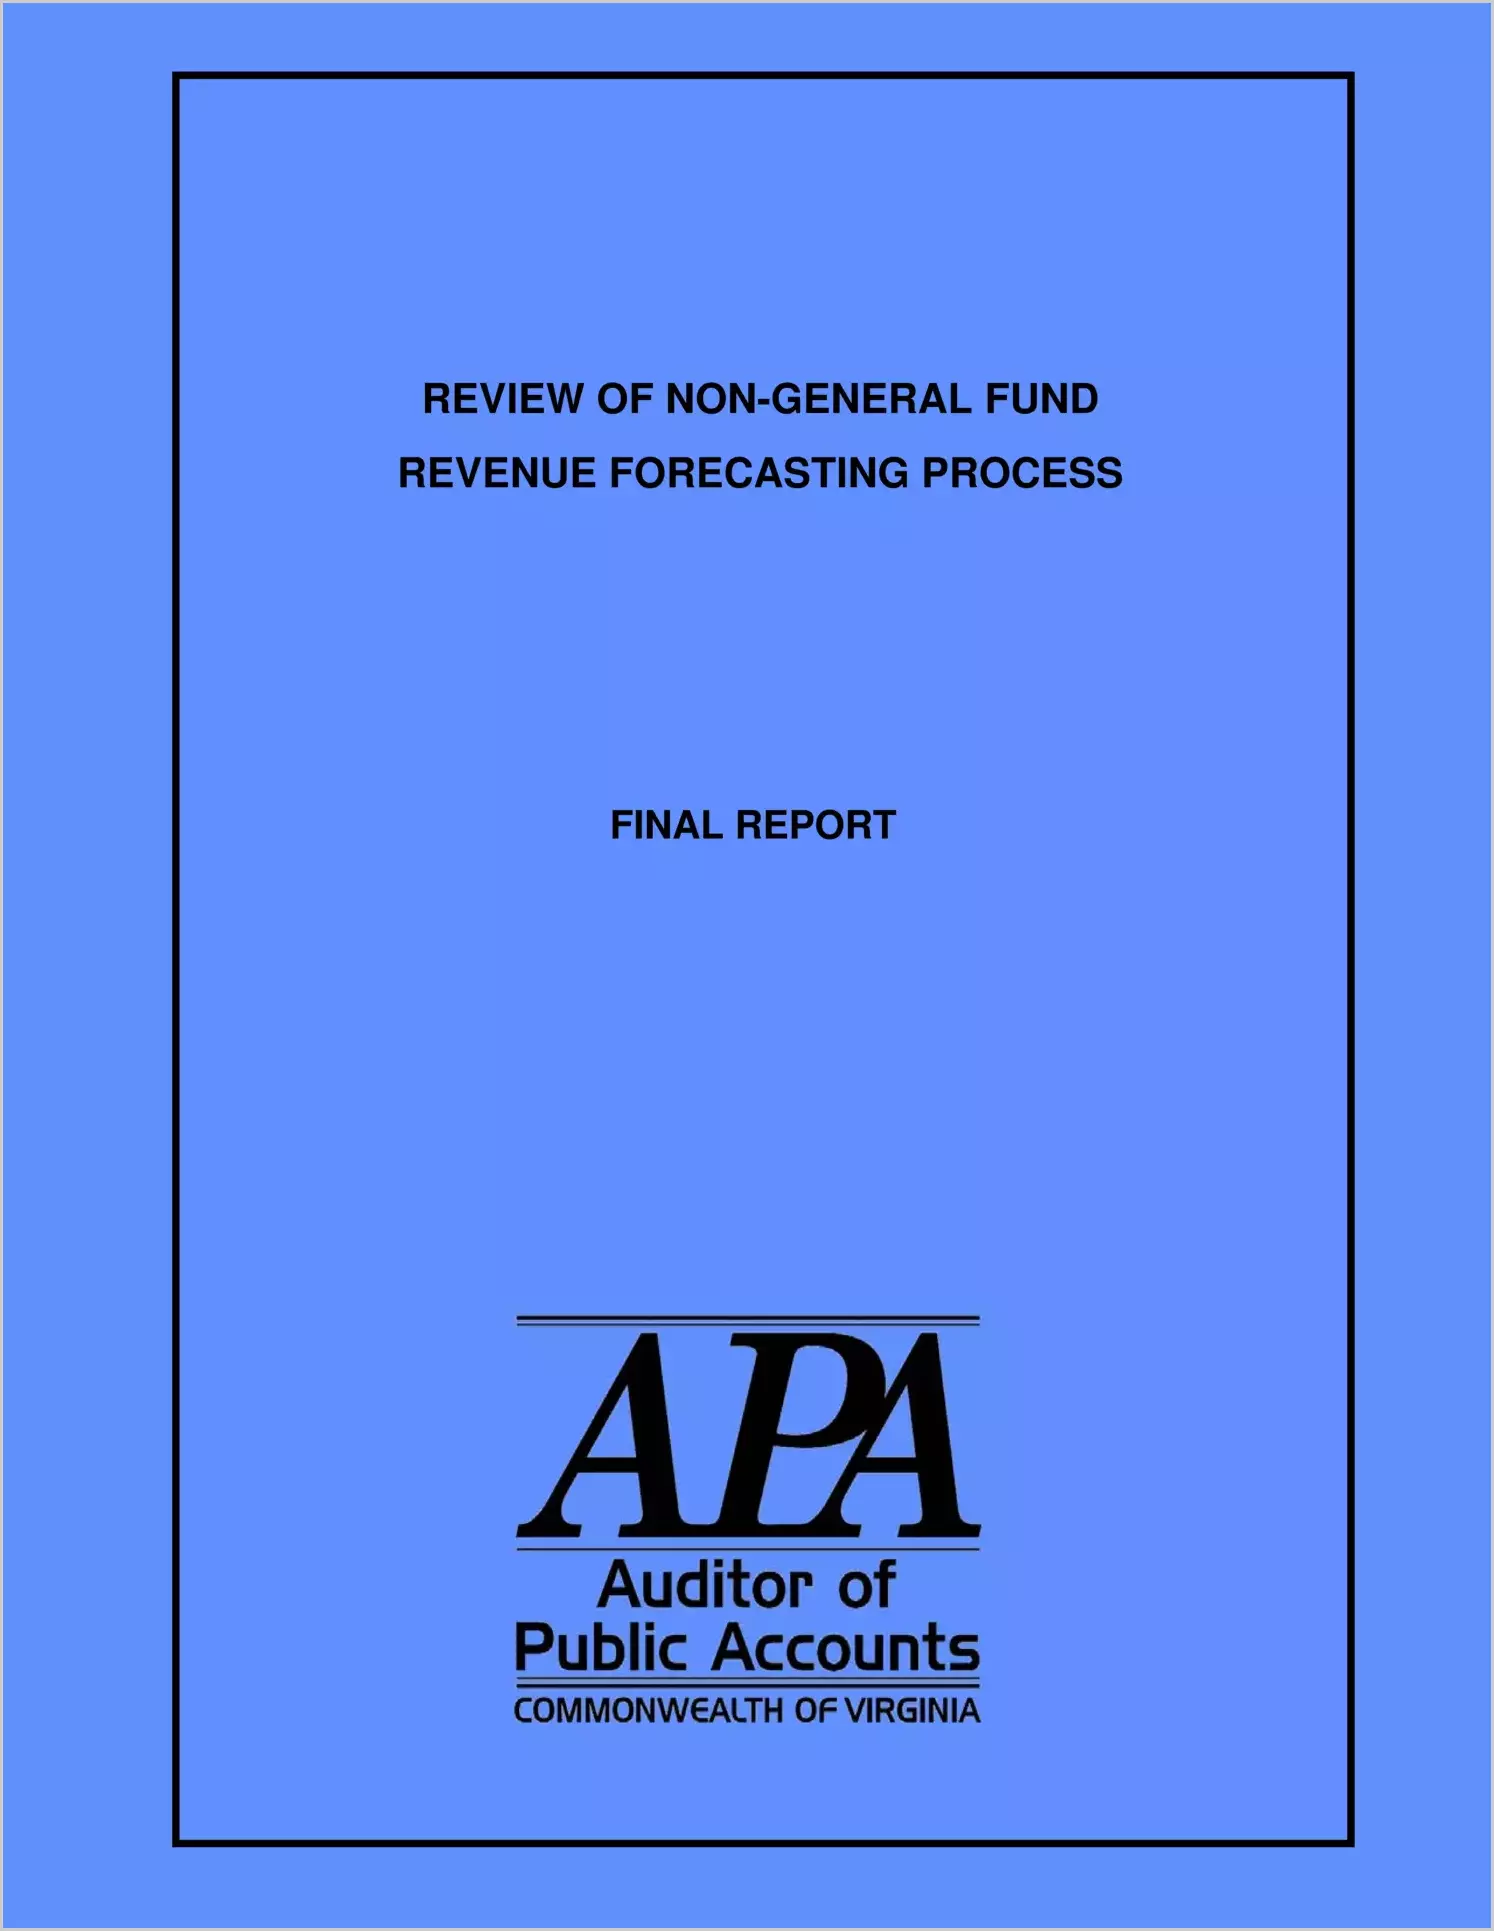 Review of Non-General Fund Revenue Forecasting Process Final Report